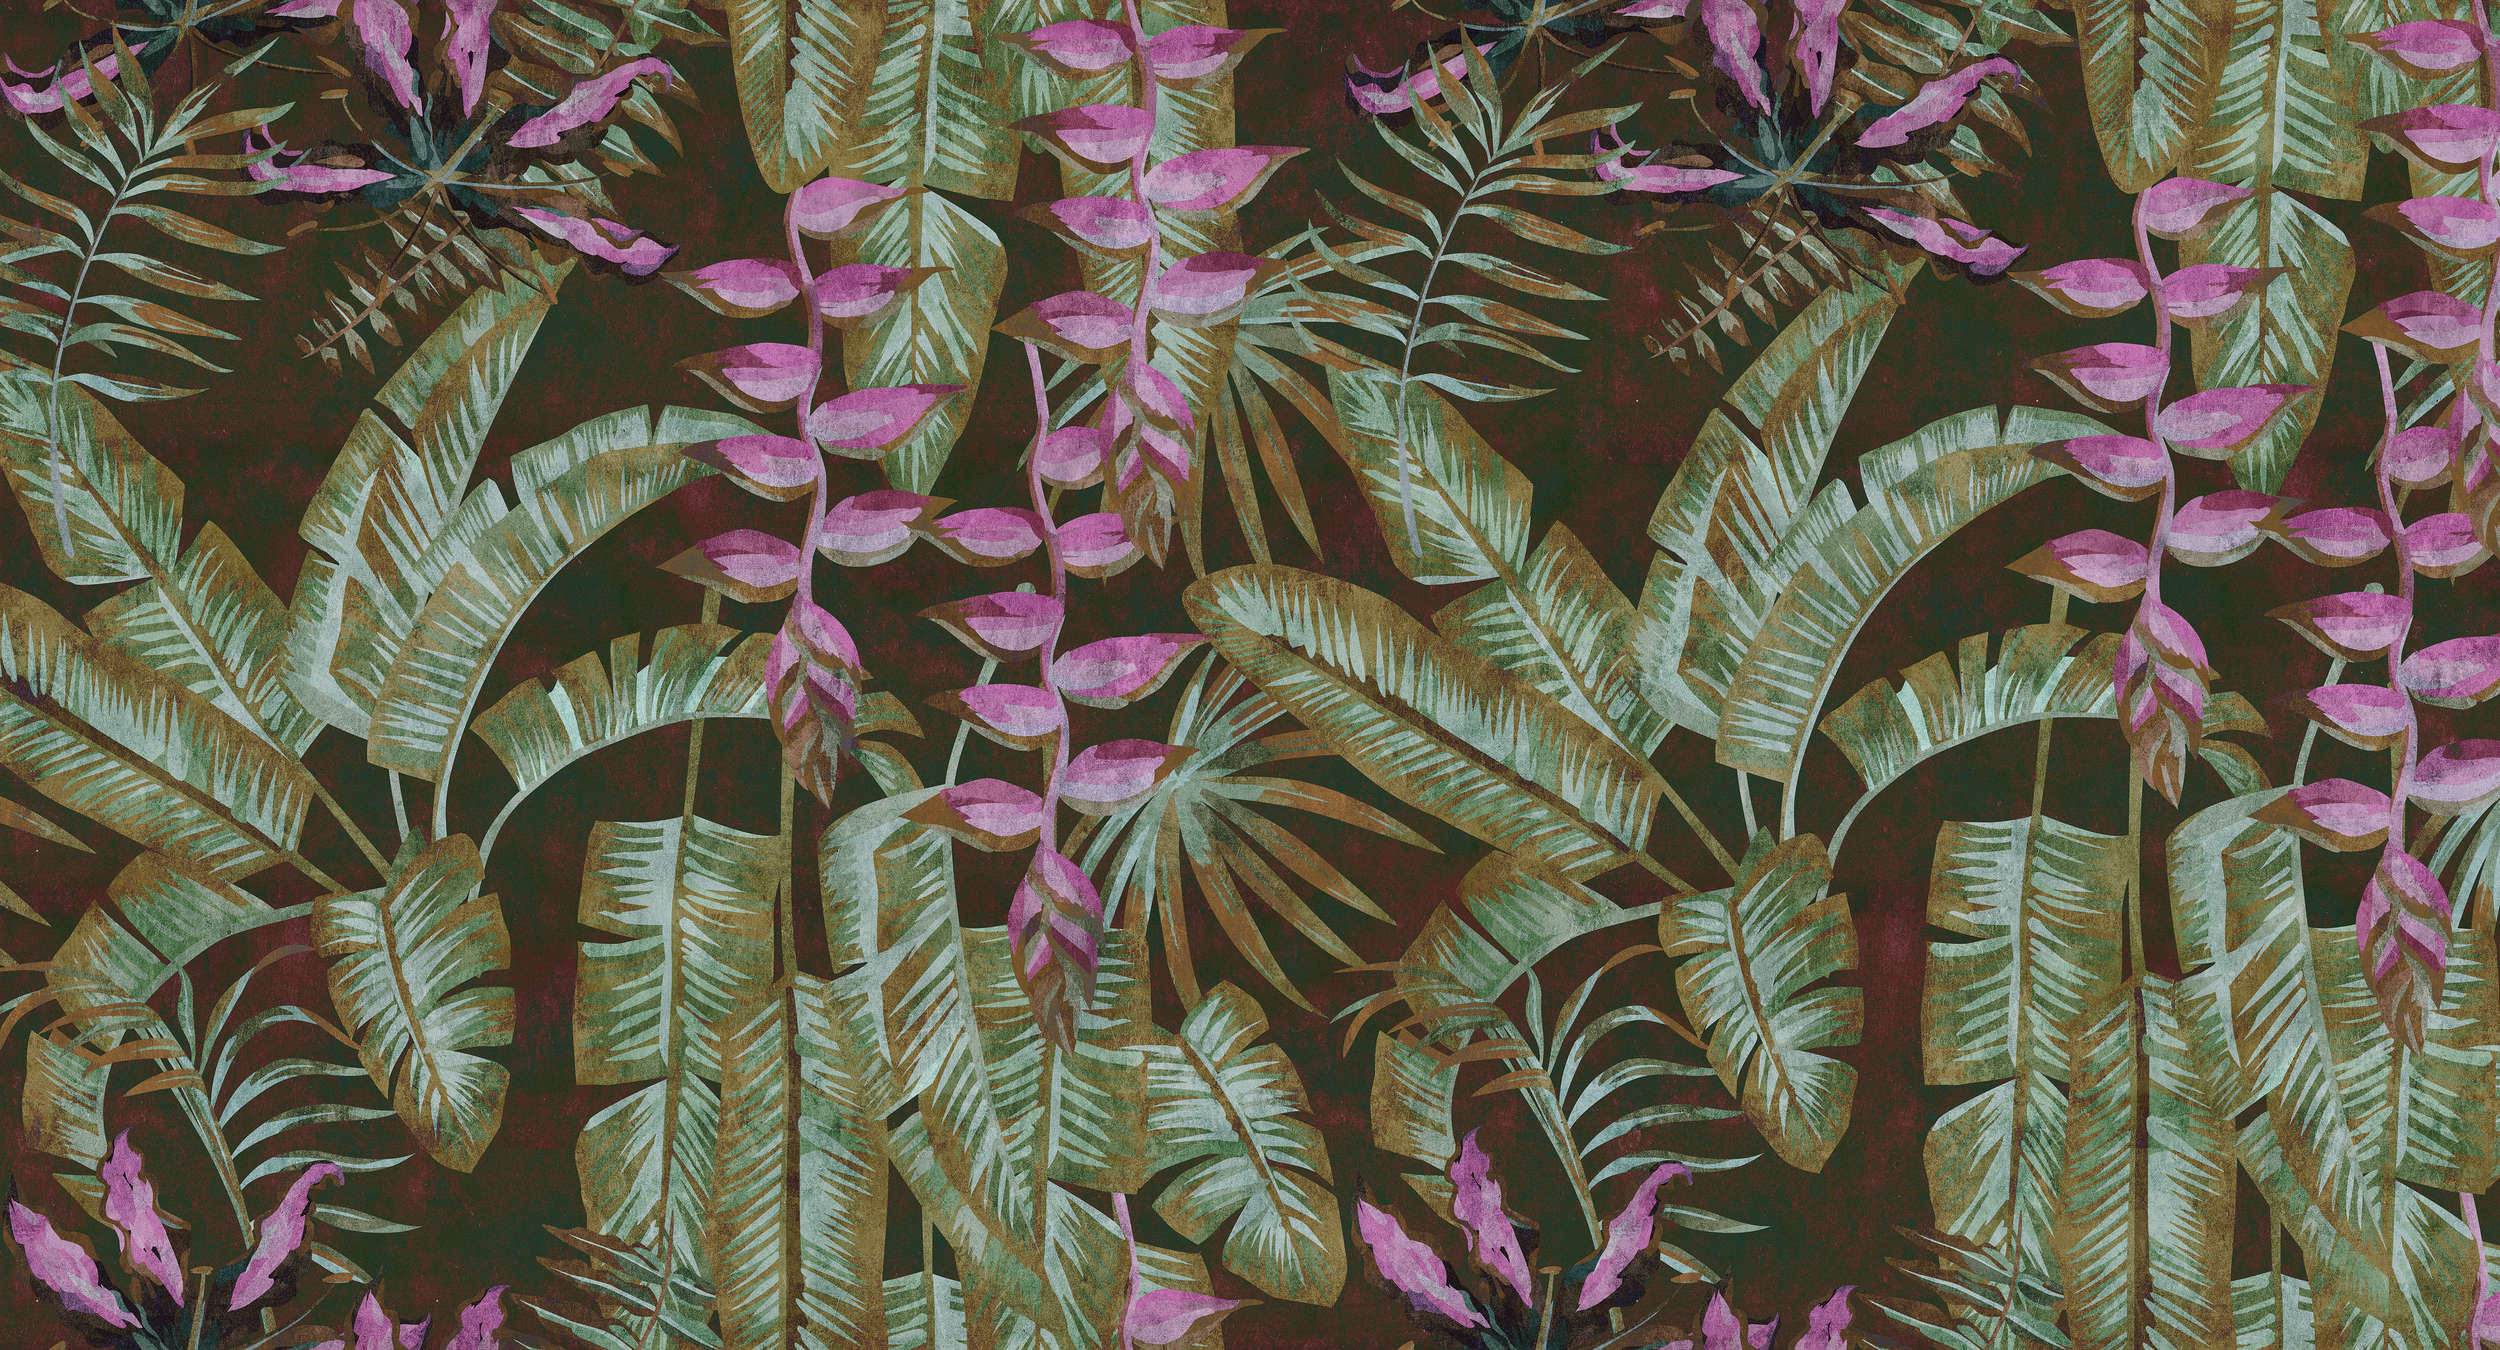             Tropicana 1 - Jungle Wallpaper with Banana Leaves&Farms Blotting Paper Texture - Green, Purple | Pearl Smooth Non-woven
        